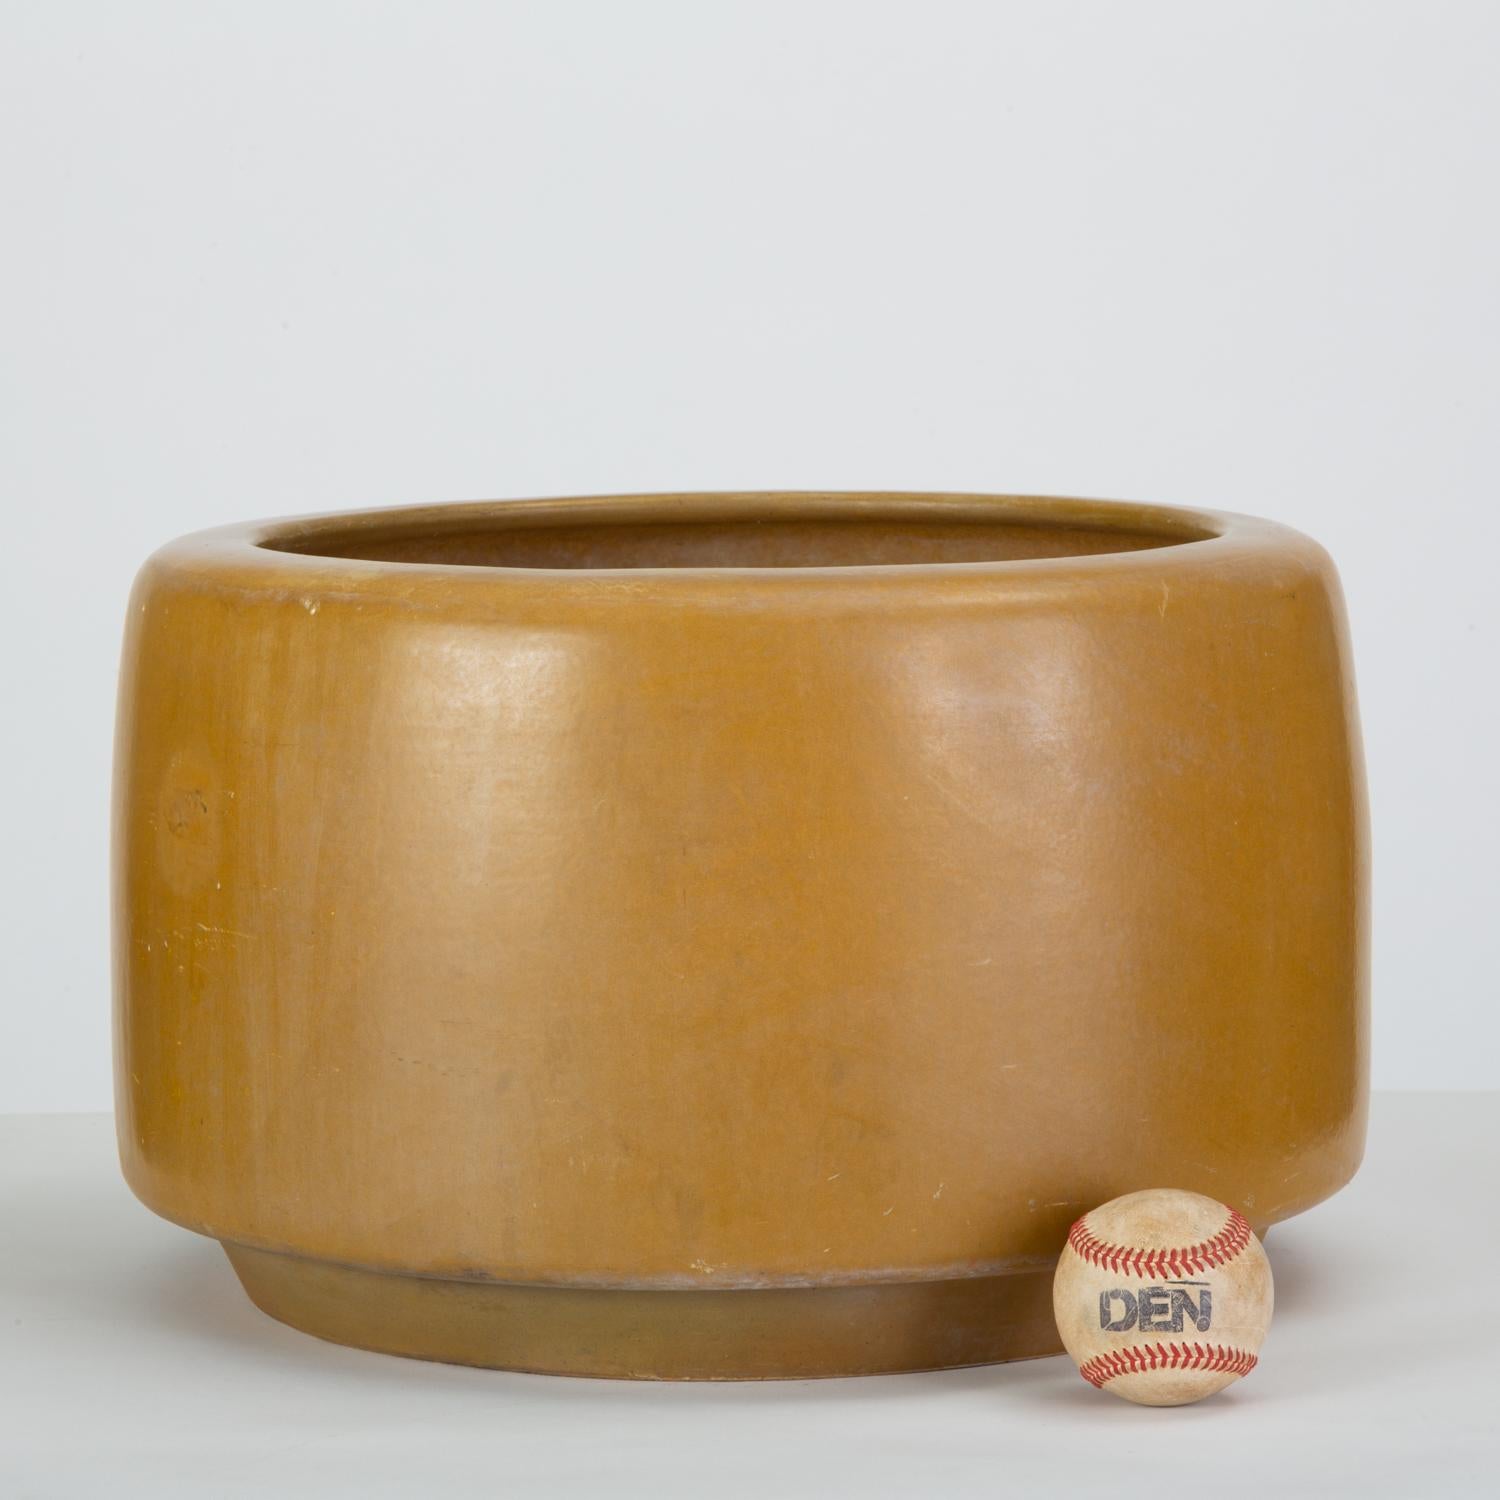 A mustard yellow bisque planter by John Follis for Architectural Pottery. This example has a drum shape with a rounded lip that curves in at the top of the piece. Planter retains partial stamp: “Architectural Pottery Made in USA.” We have a two